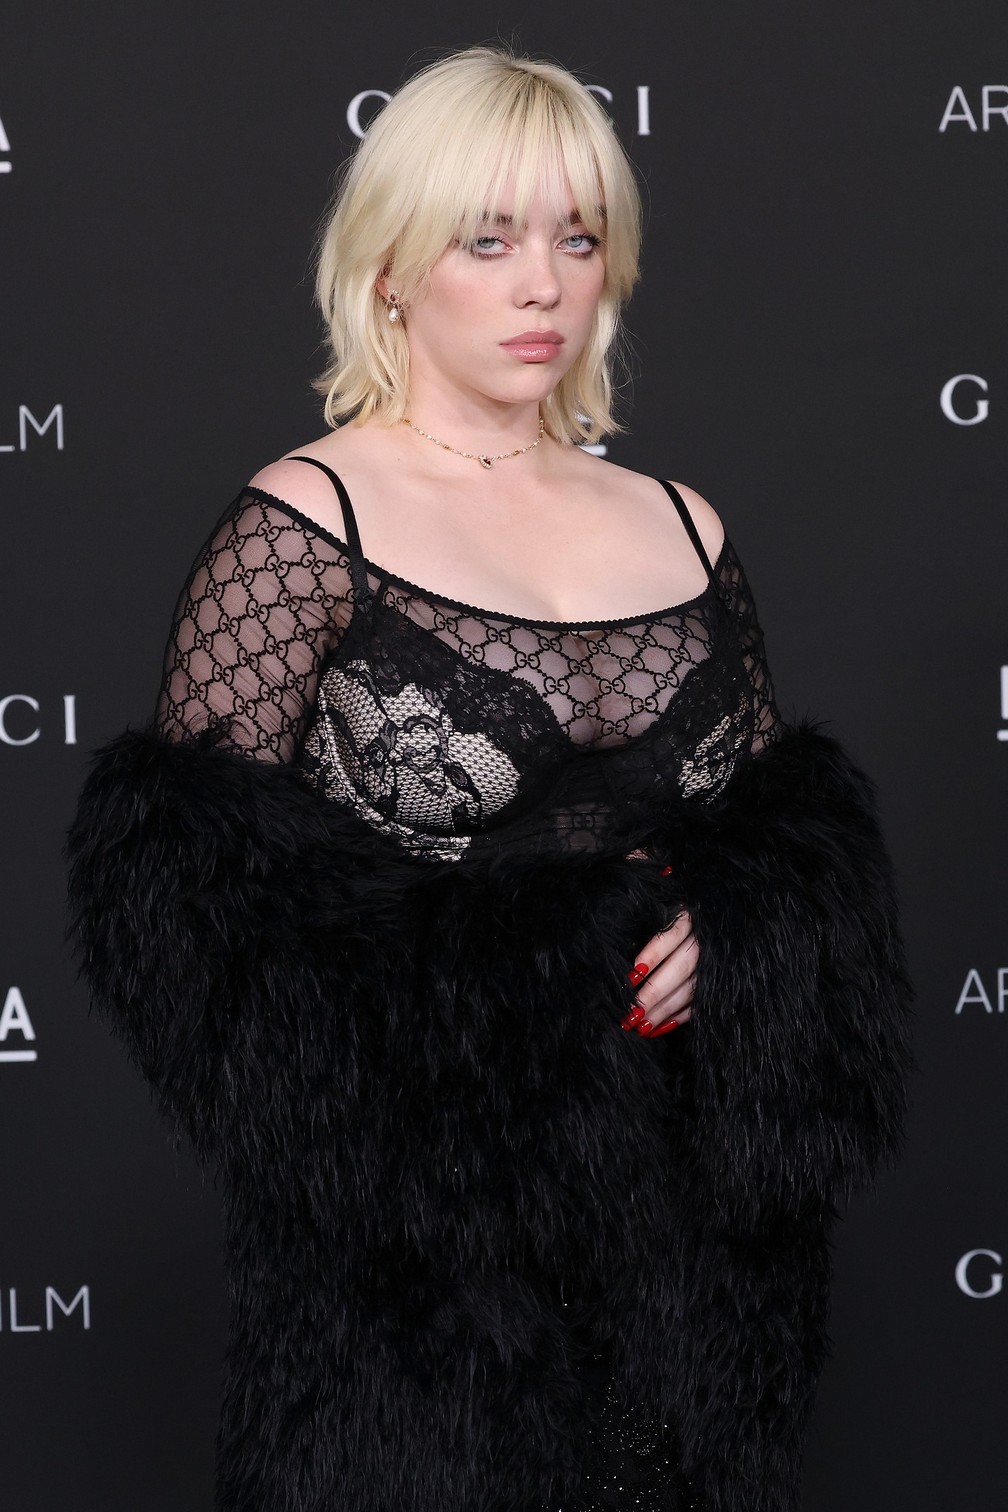 Billie Eilish Showed Her Tits For The First Time TheFappening.Pro 3 - Billie Eilish Hot In A Revealing Outfit (13 Photos)